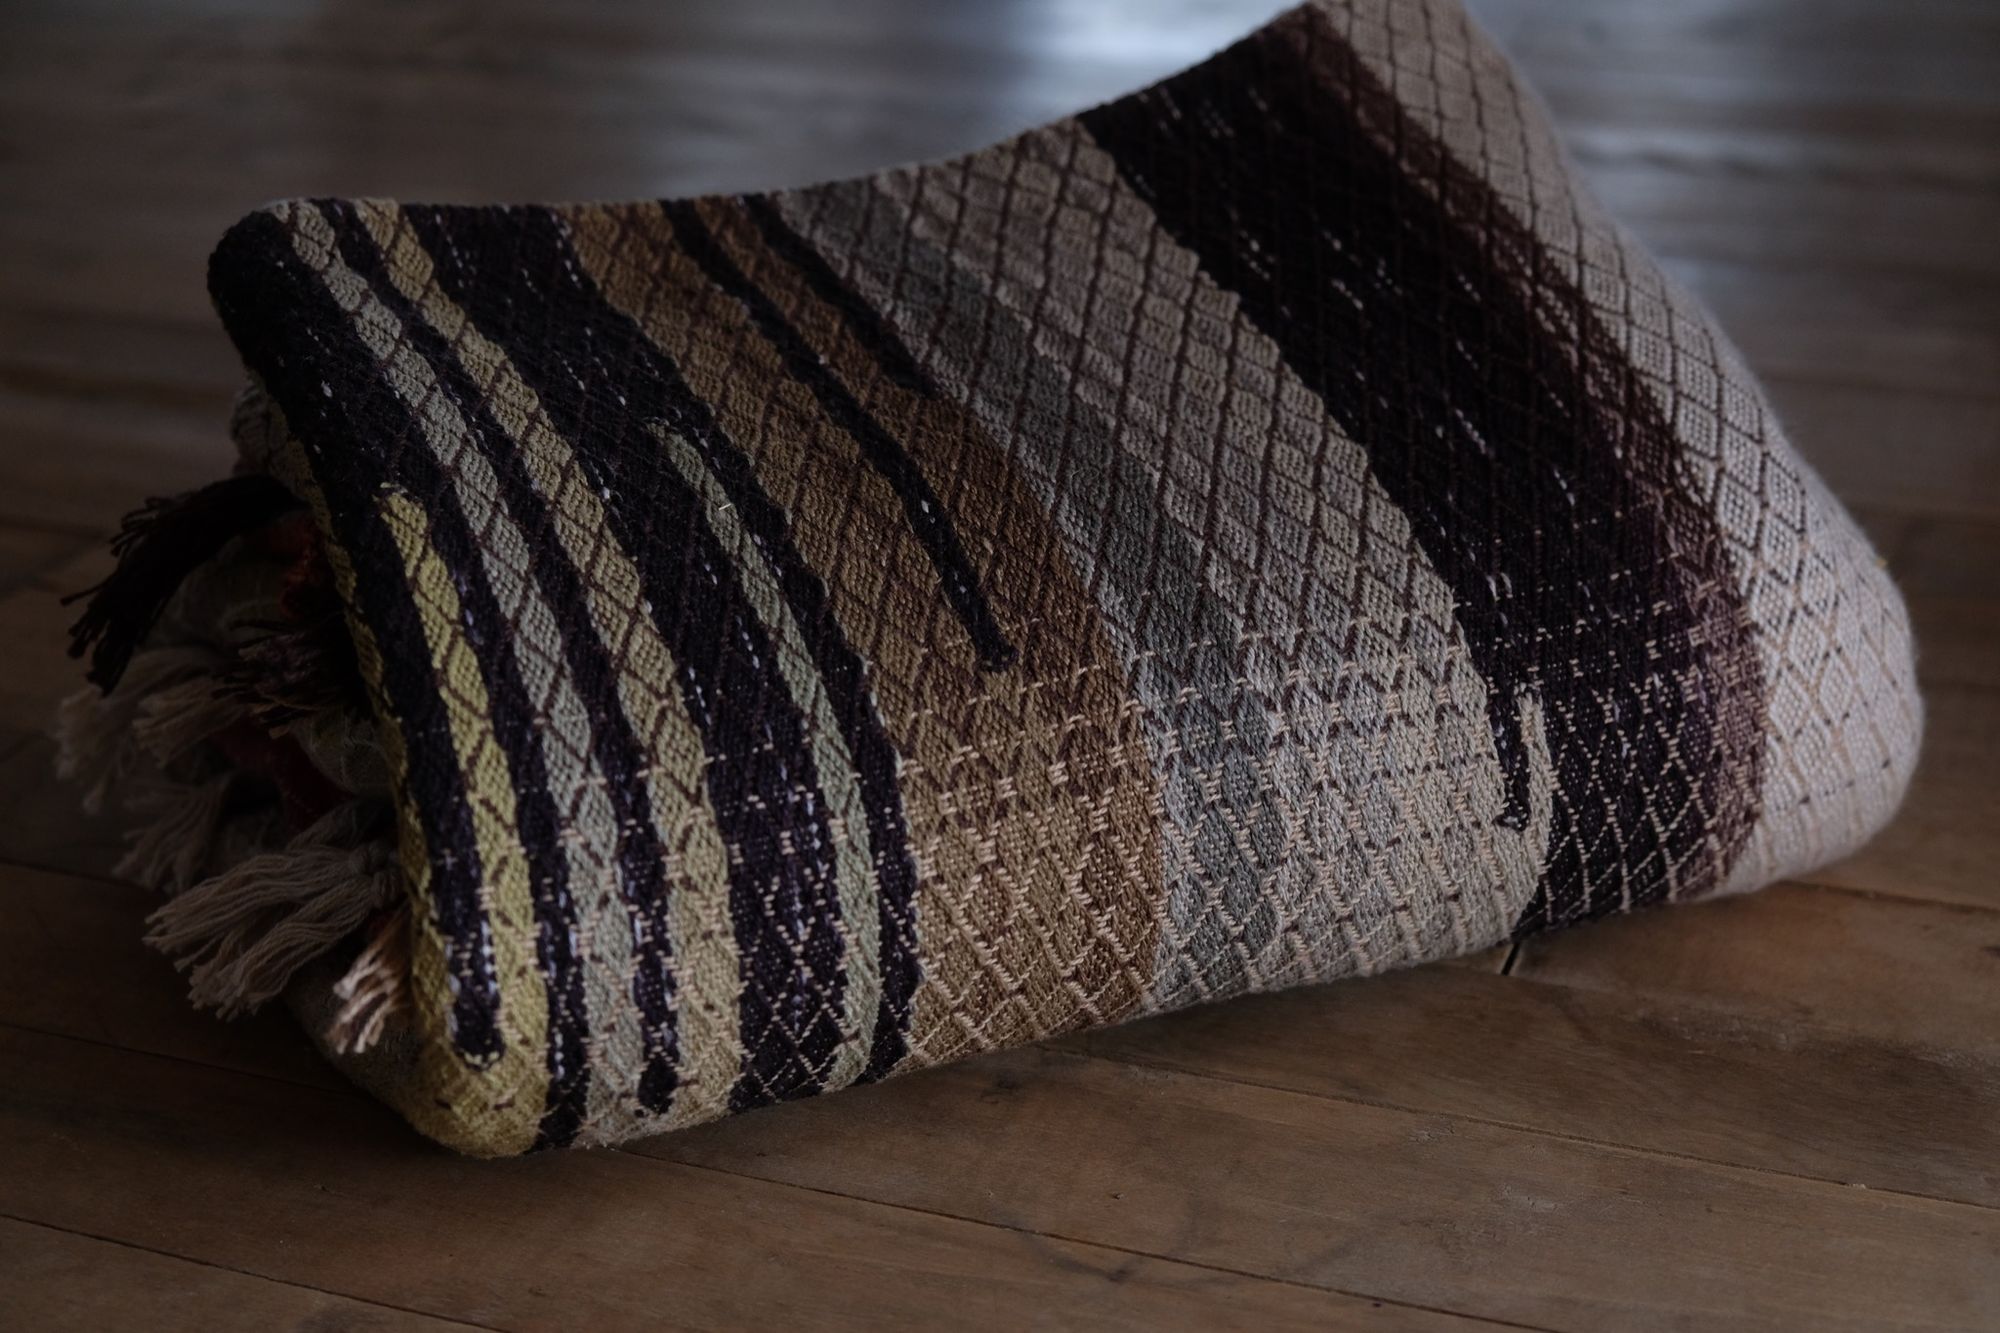 geometric shaped, natural and rainbow colored handwoven, diamond pattern fabric on a wooden floor, folded